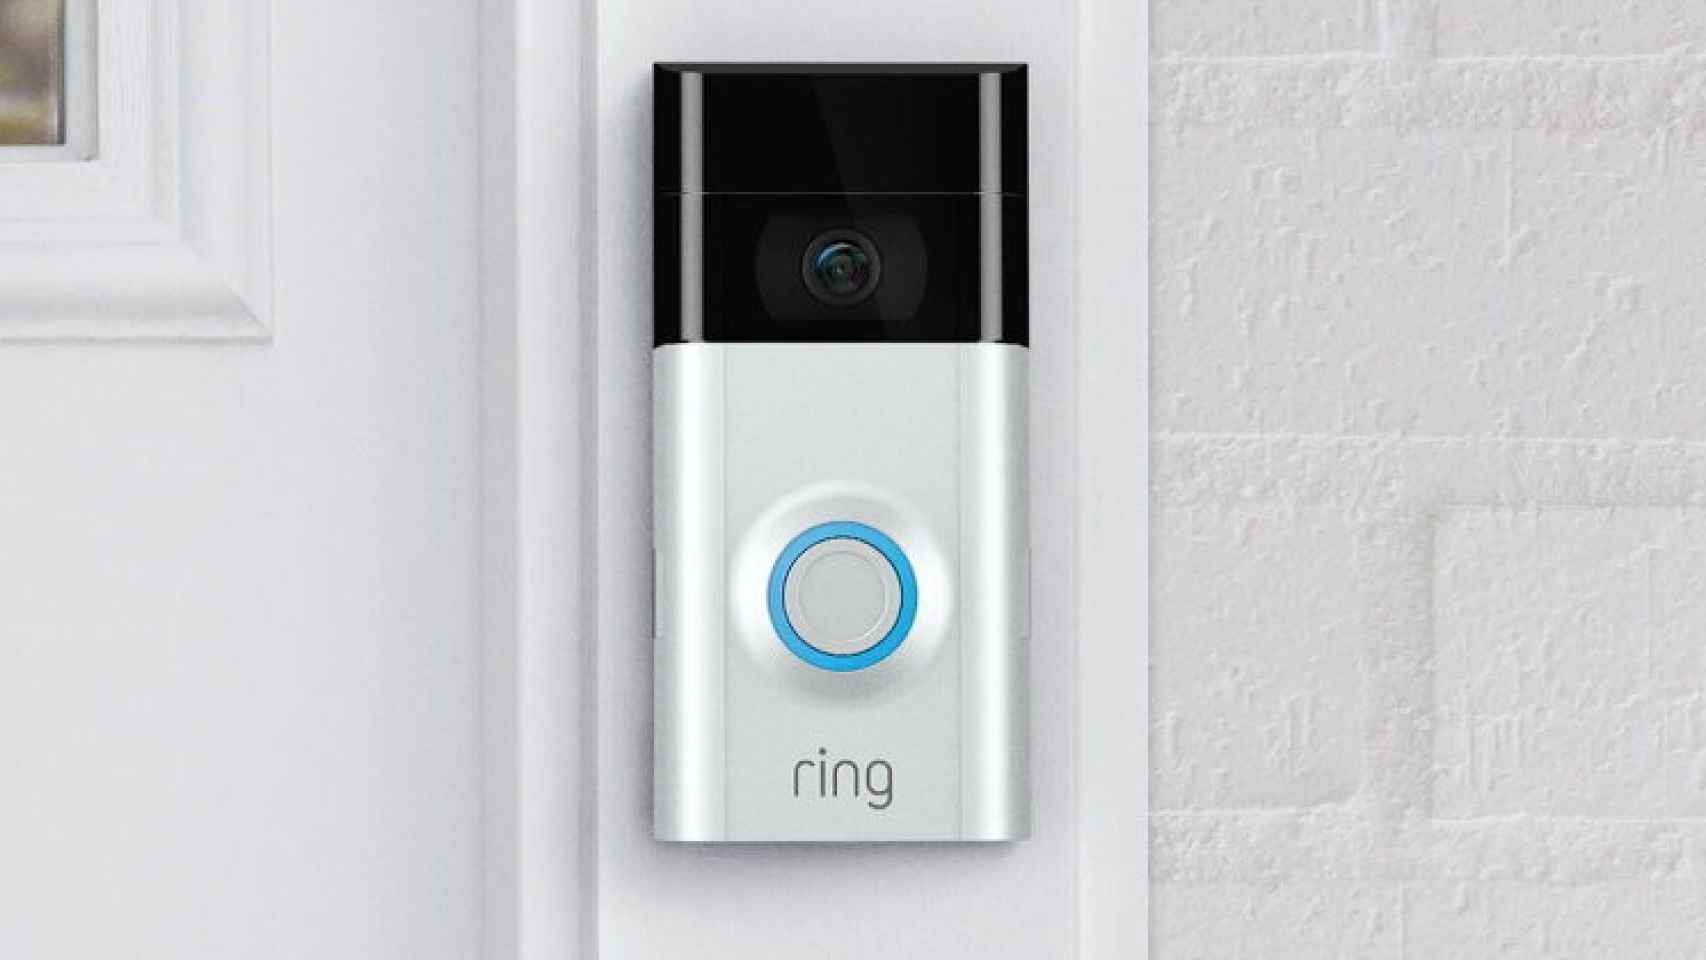 Timbre inteligente Ring.